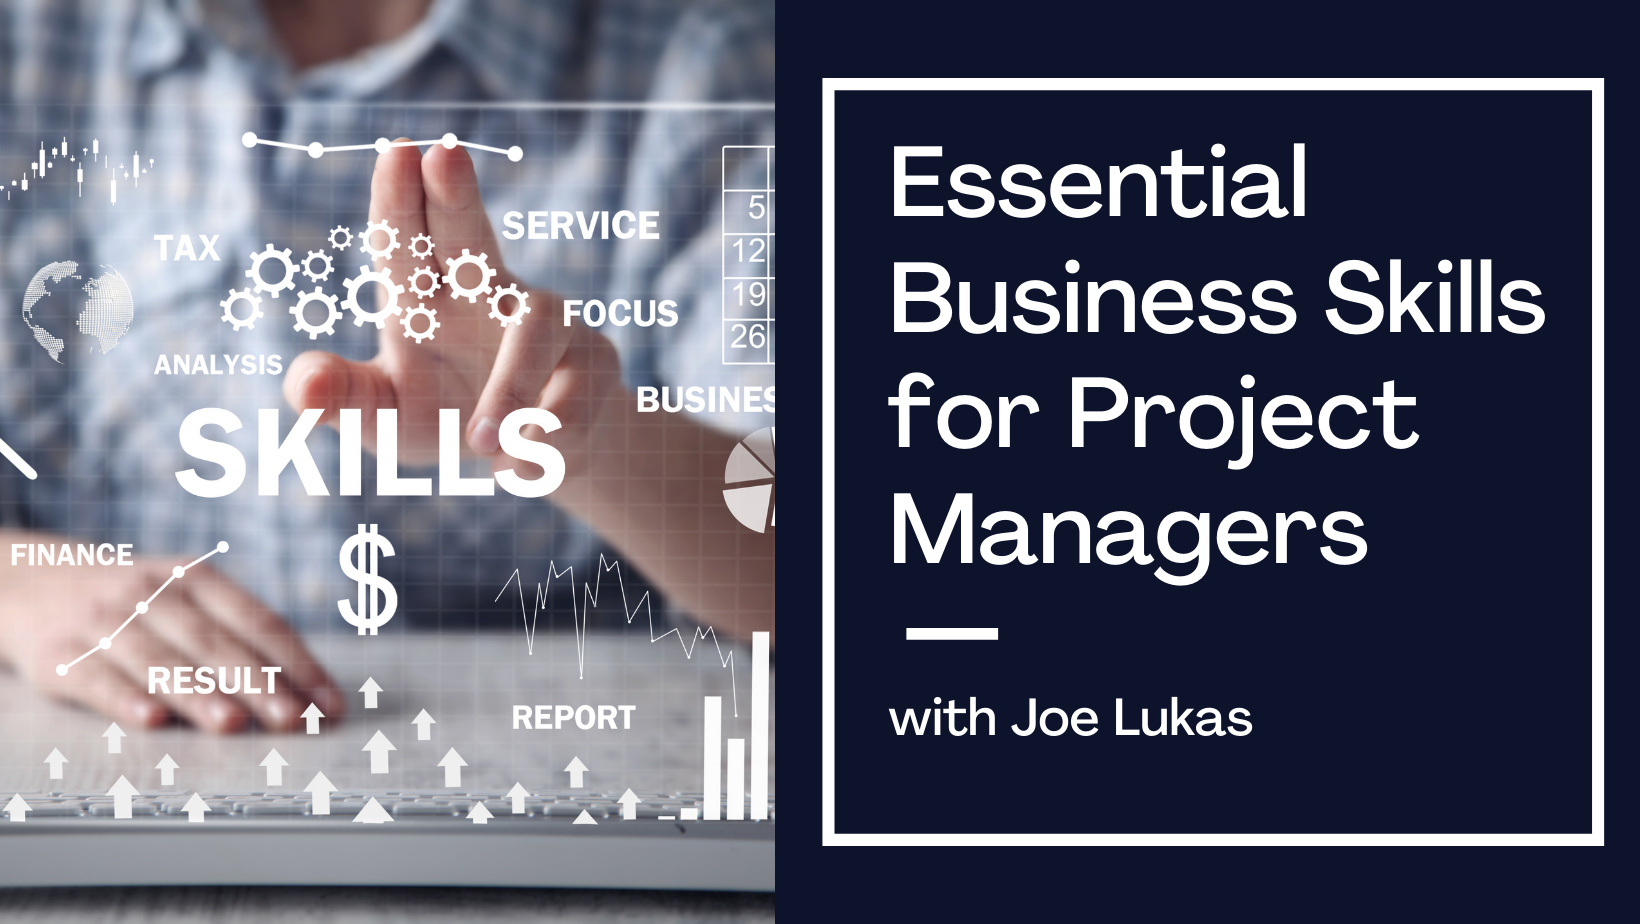 Essential-Business-Skills-for-Project-Managers---FB.png